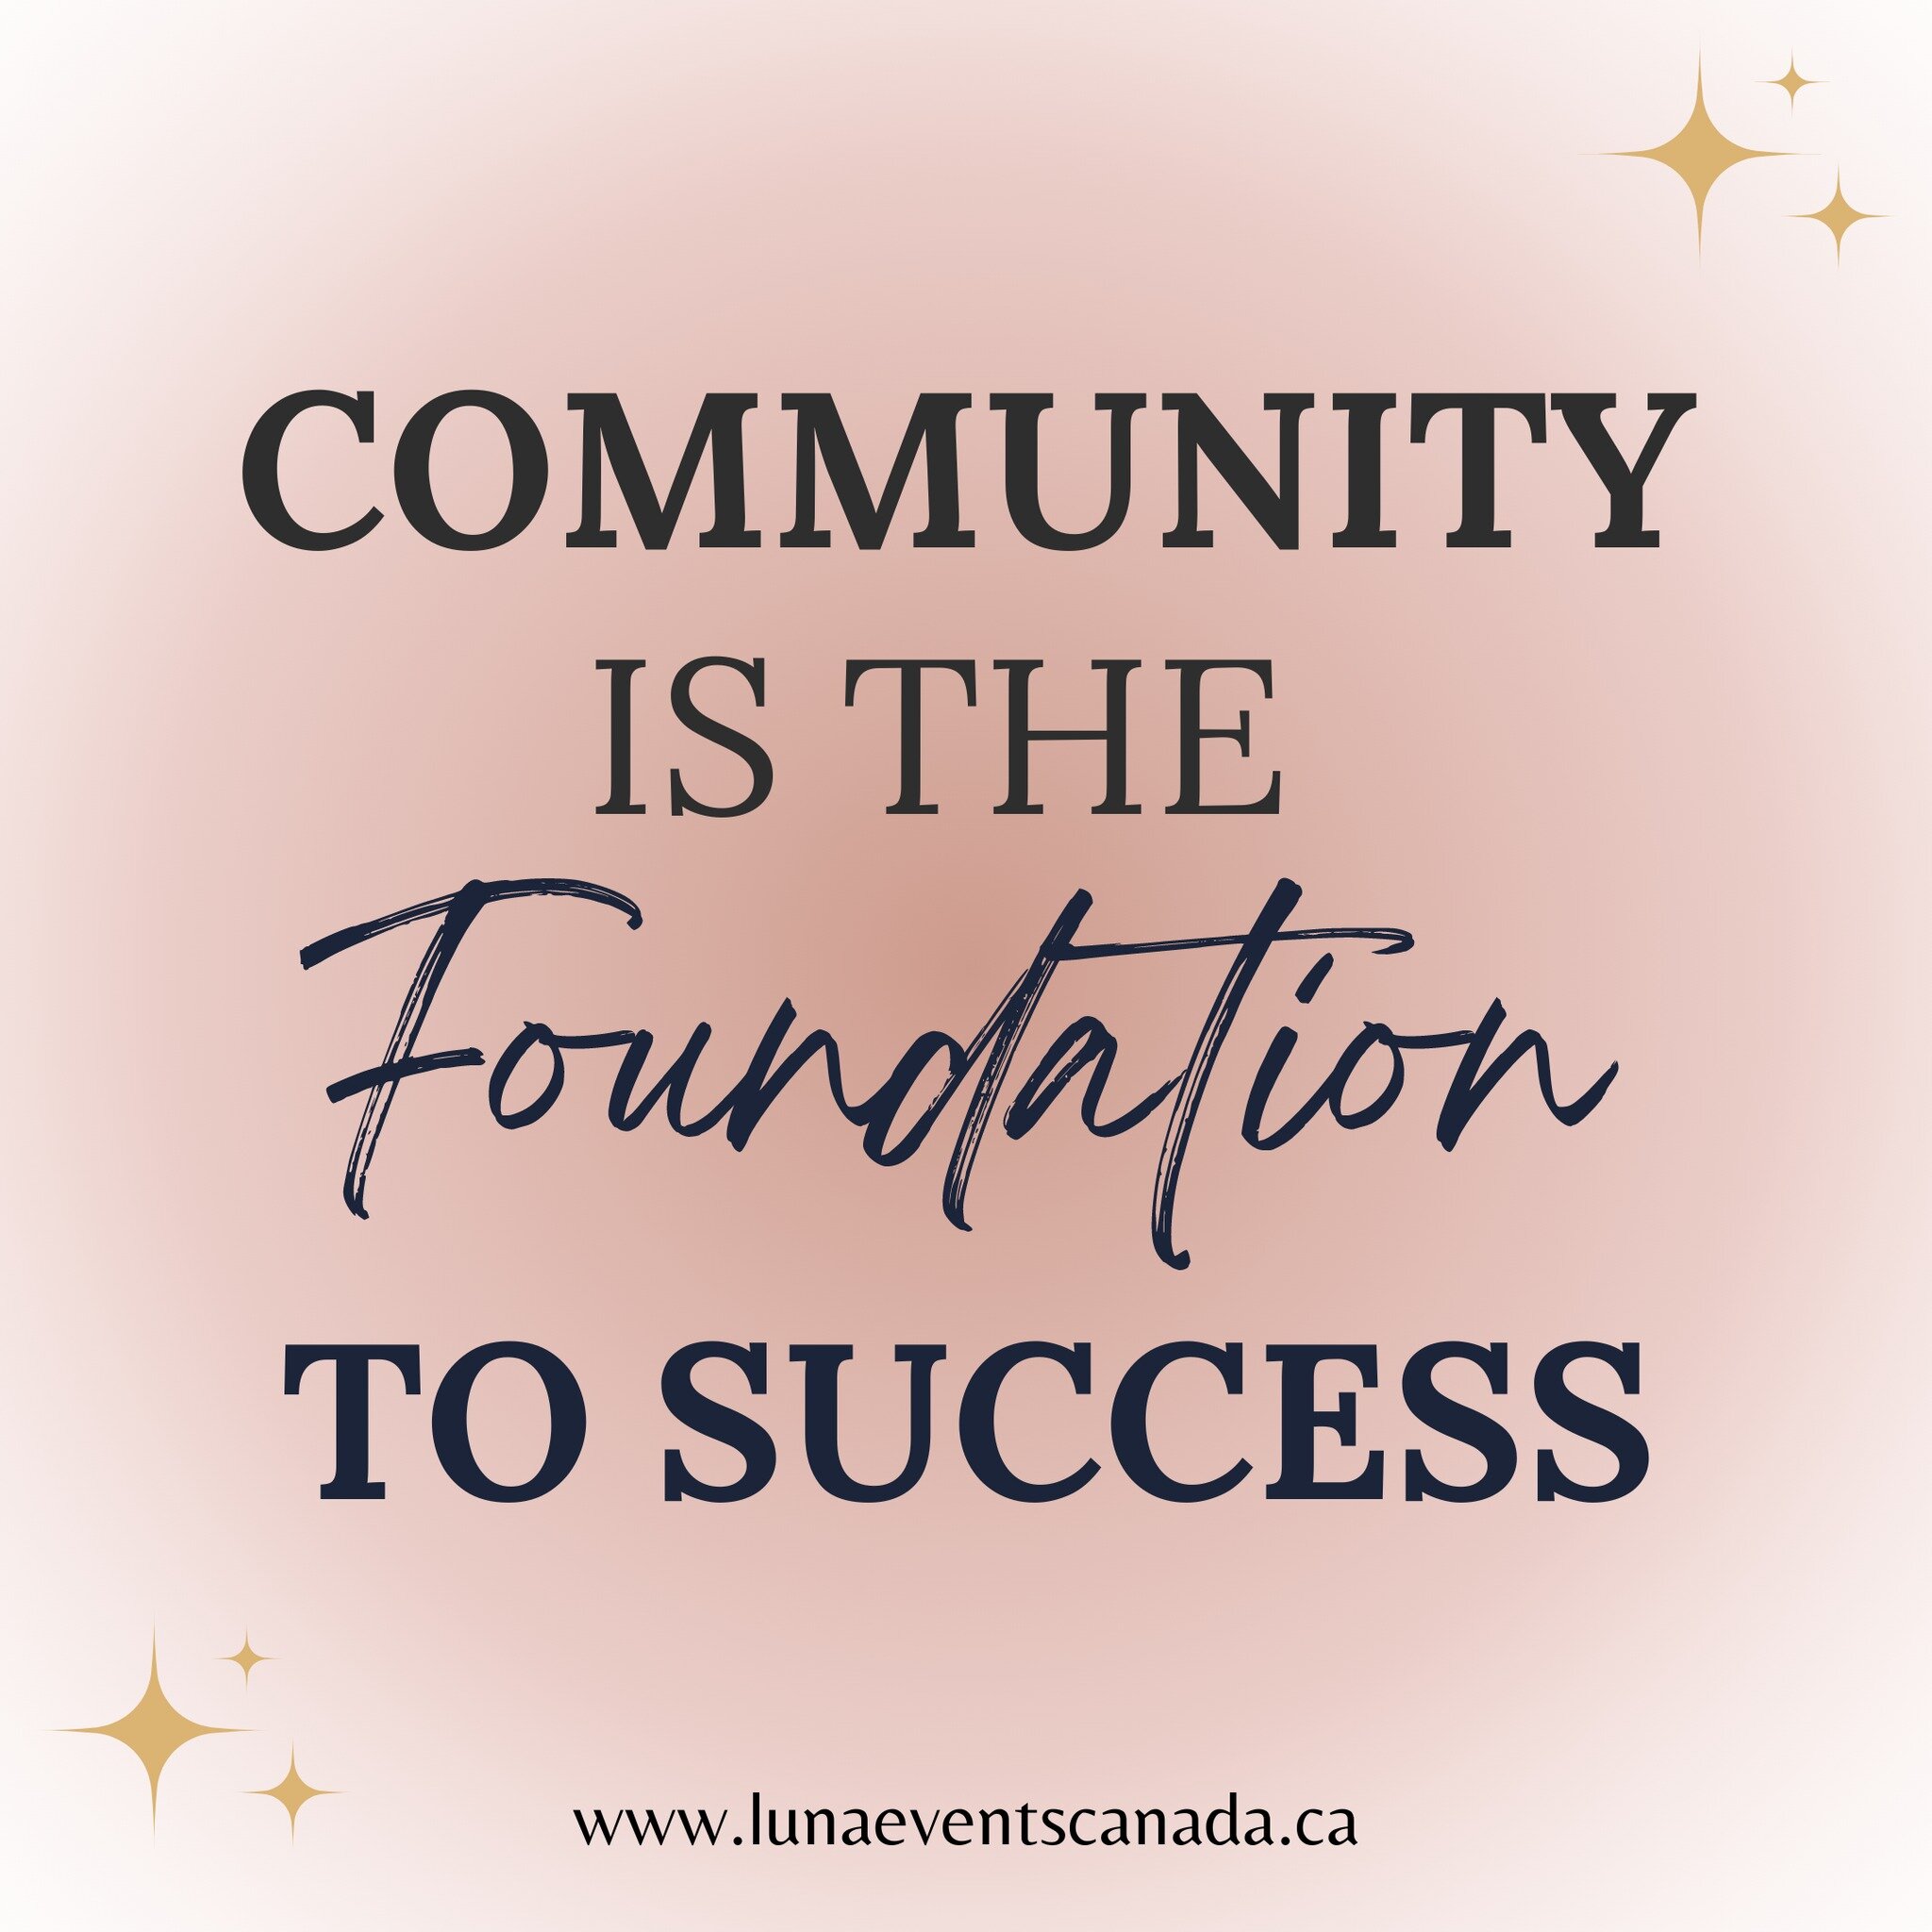 Thank you for always supporting and shopping local. 💜

#supportlocal #supportlocalwitches #supportlocalbusiness #ShopSmall #shoplocal #weappreciateyoursupport #supportontariomade